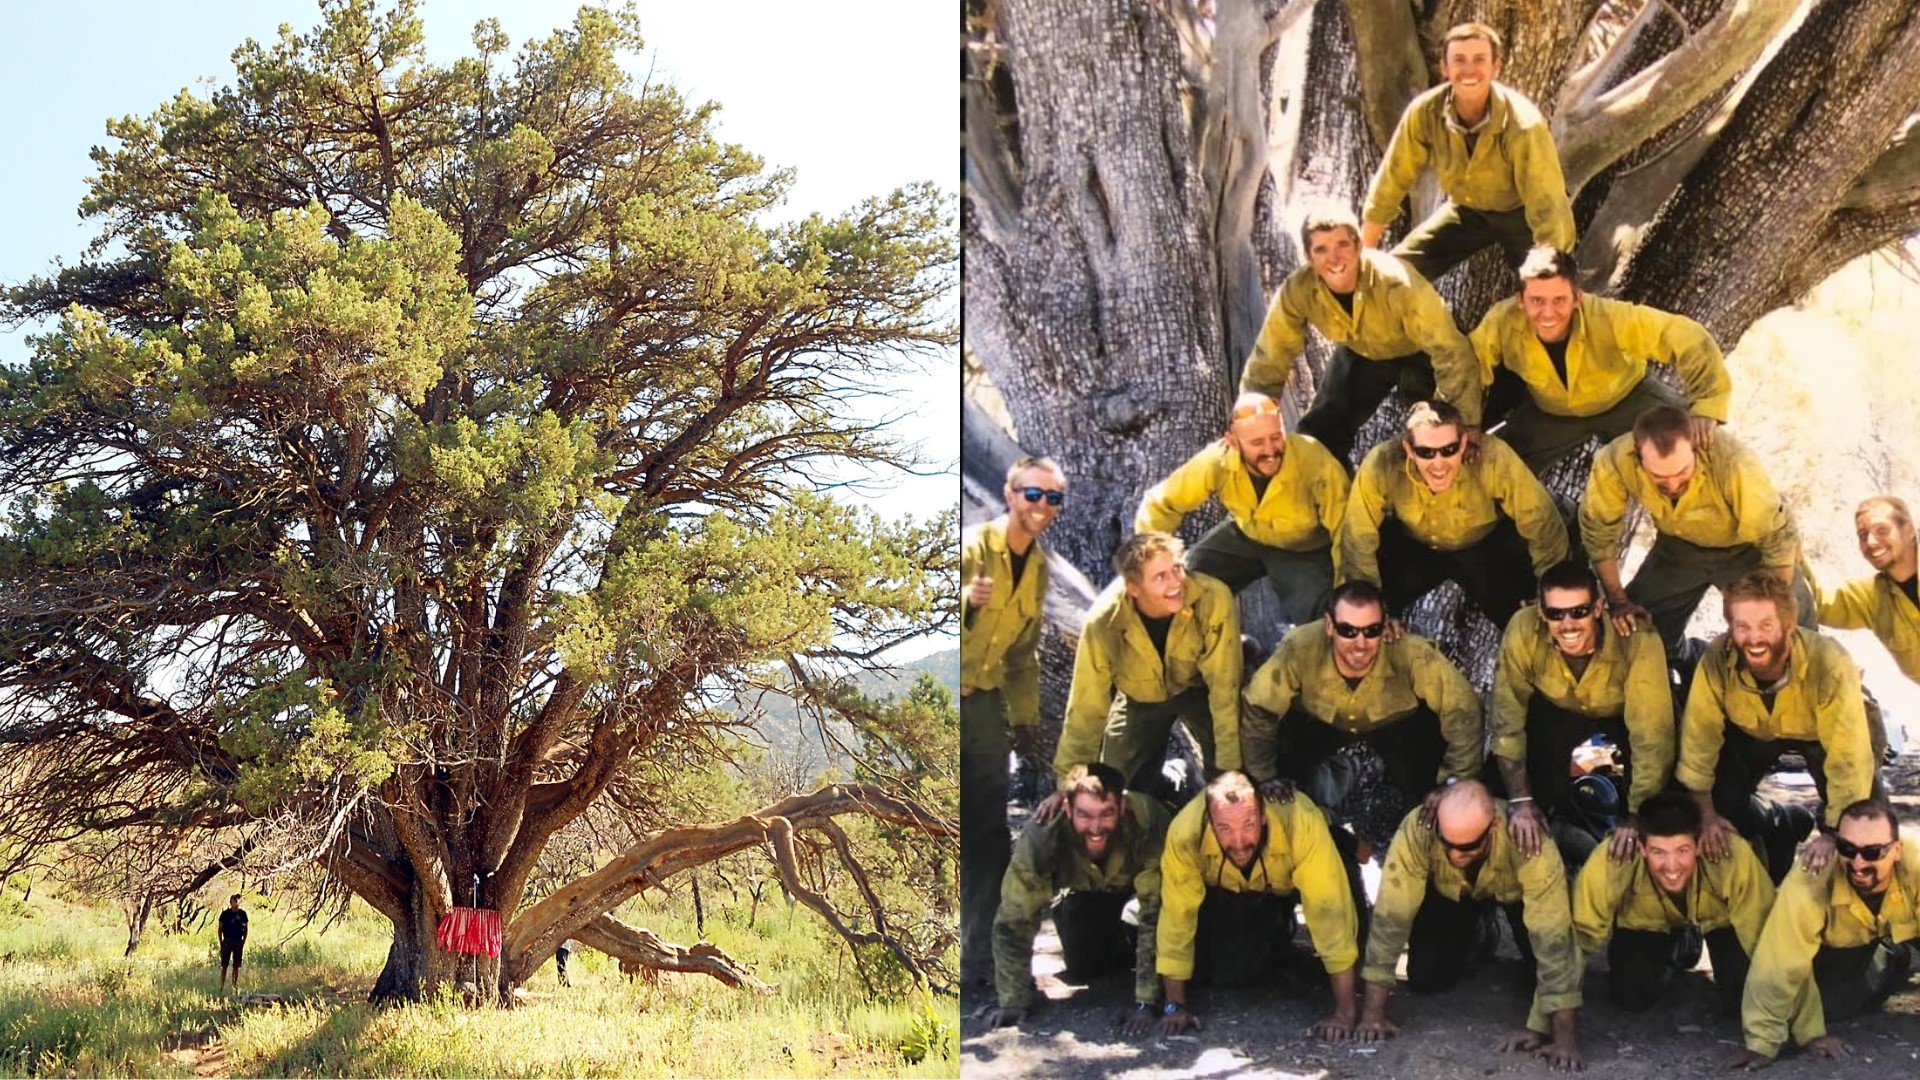 Folklore and researchers disagree on how many thousands of years the iconic Alligator juniper has lived, but the argument doesn't affect the tree's place in history.